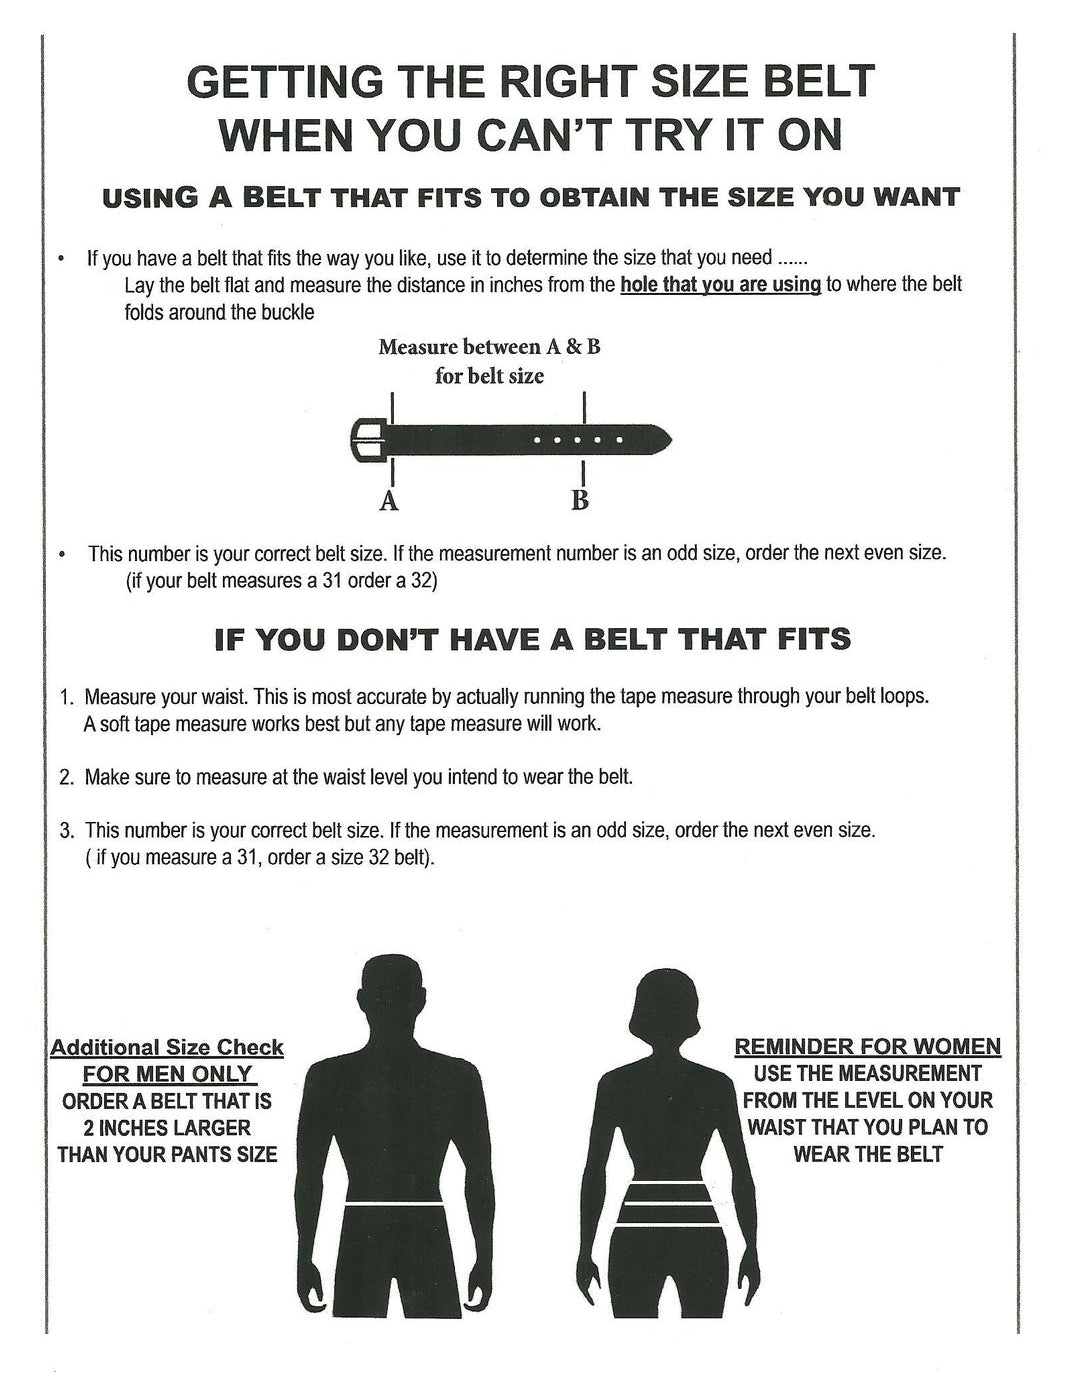 How to choose the size of the belt